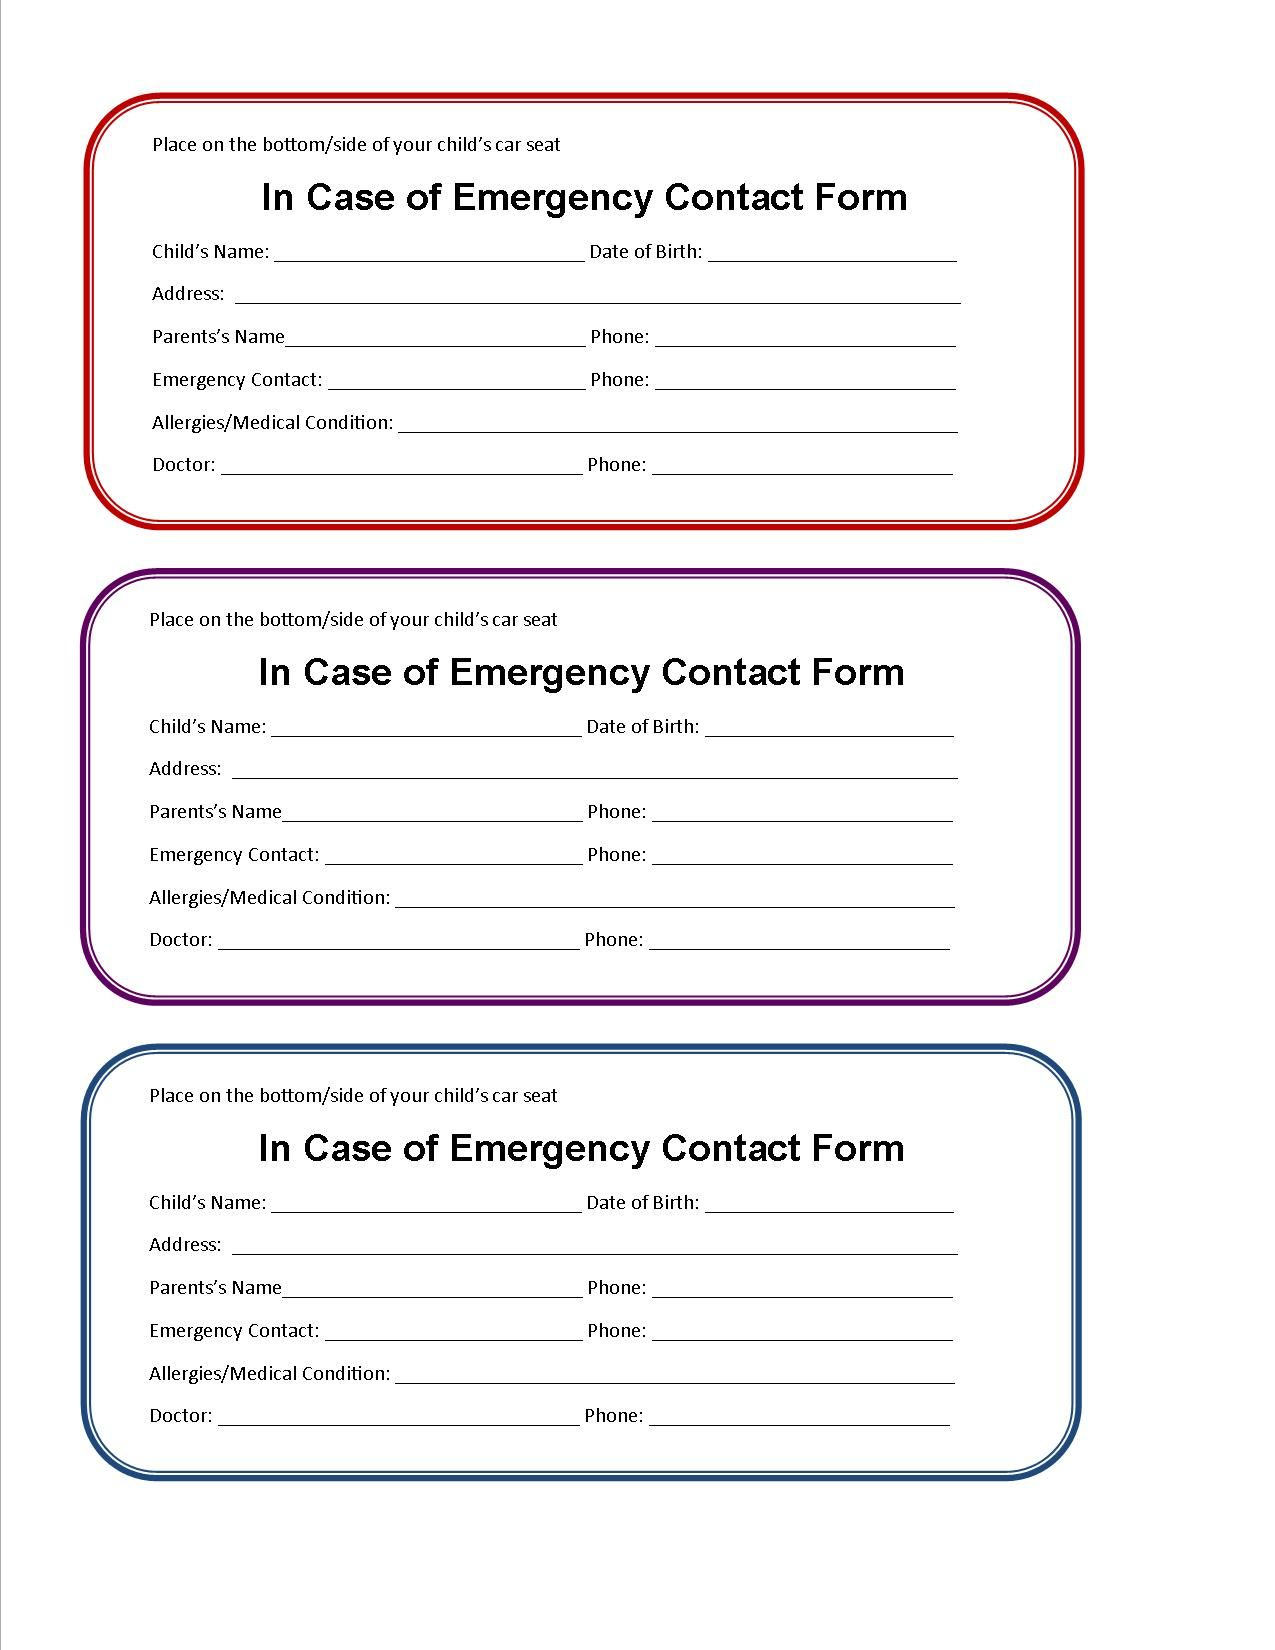 Printable Emergency Contact Form For Car Seat | Super Mom I Pertaining To In Case Of Emergency Card Template